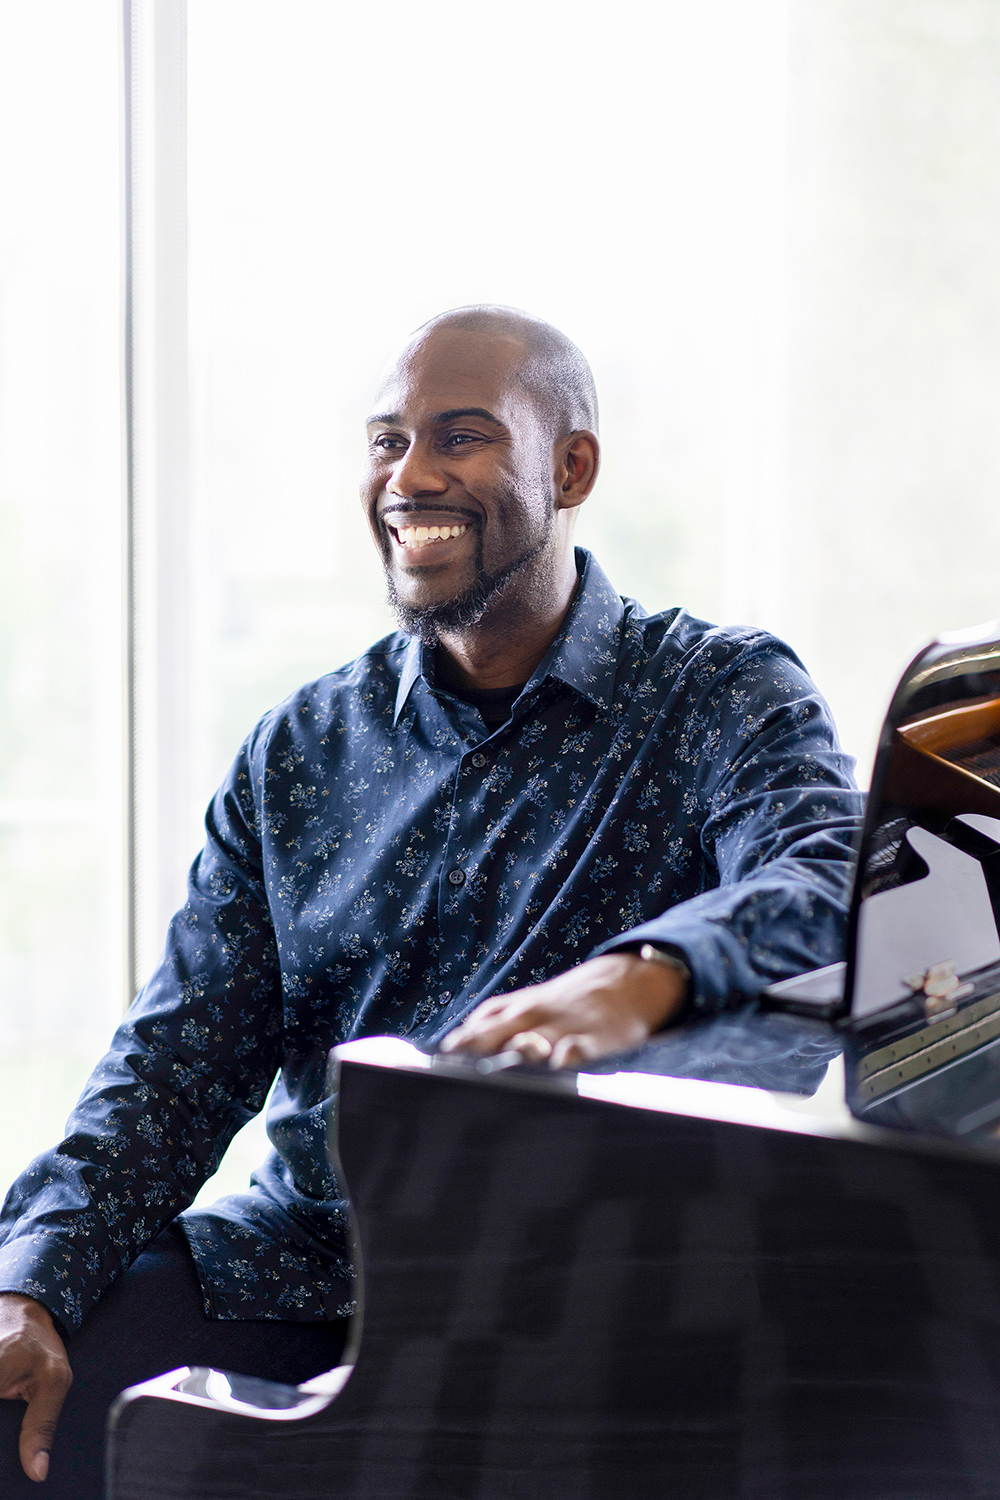 Darren Hamilton in a blue patterned, long-sleeved shirt, seated in front of a piano, smiling and looking off camera